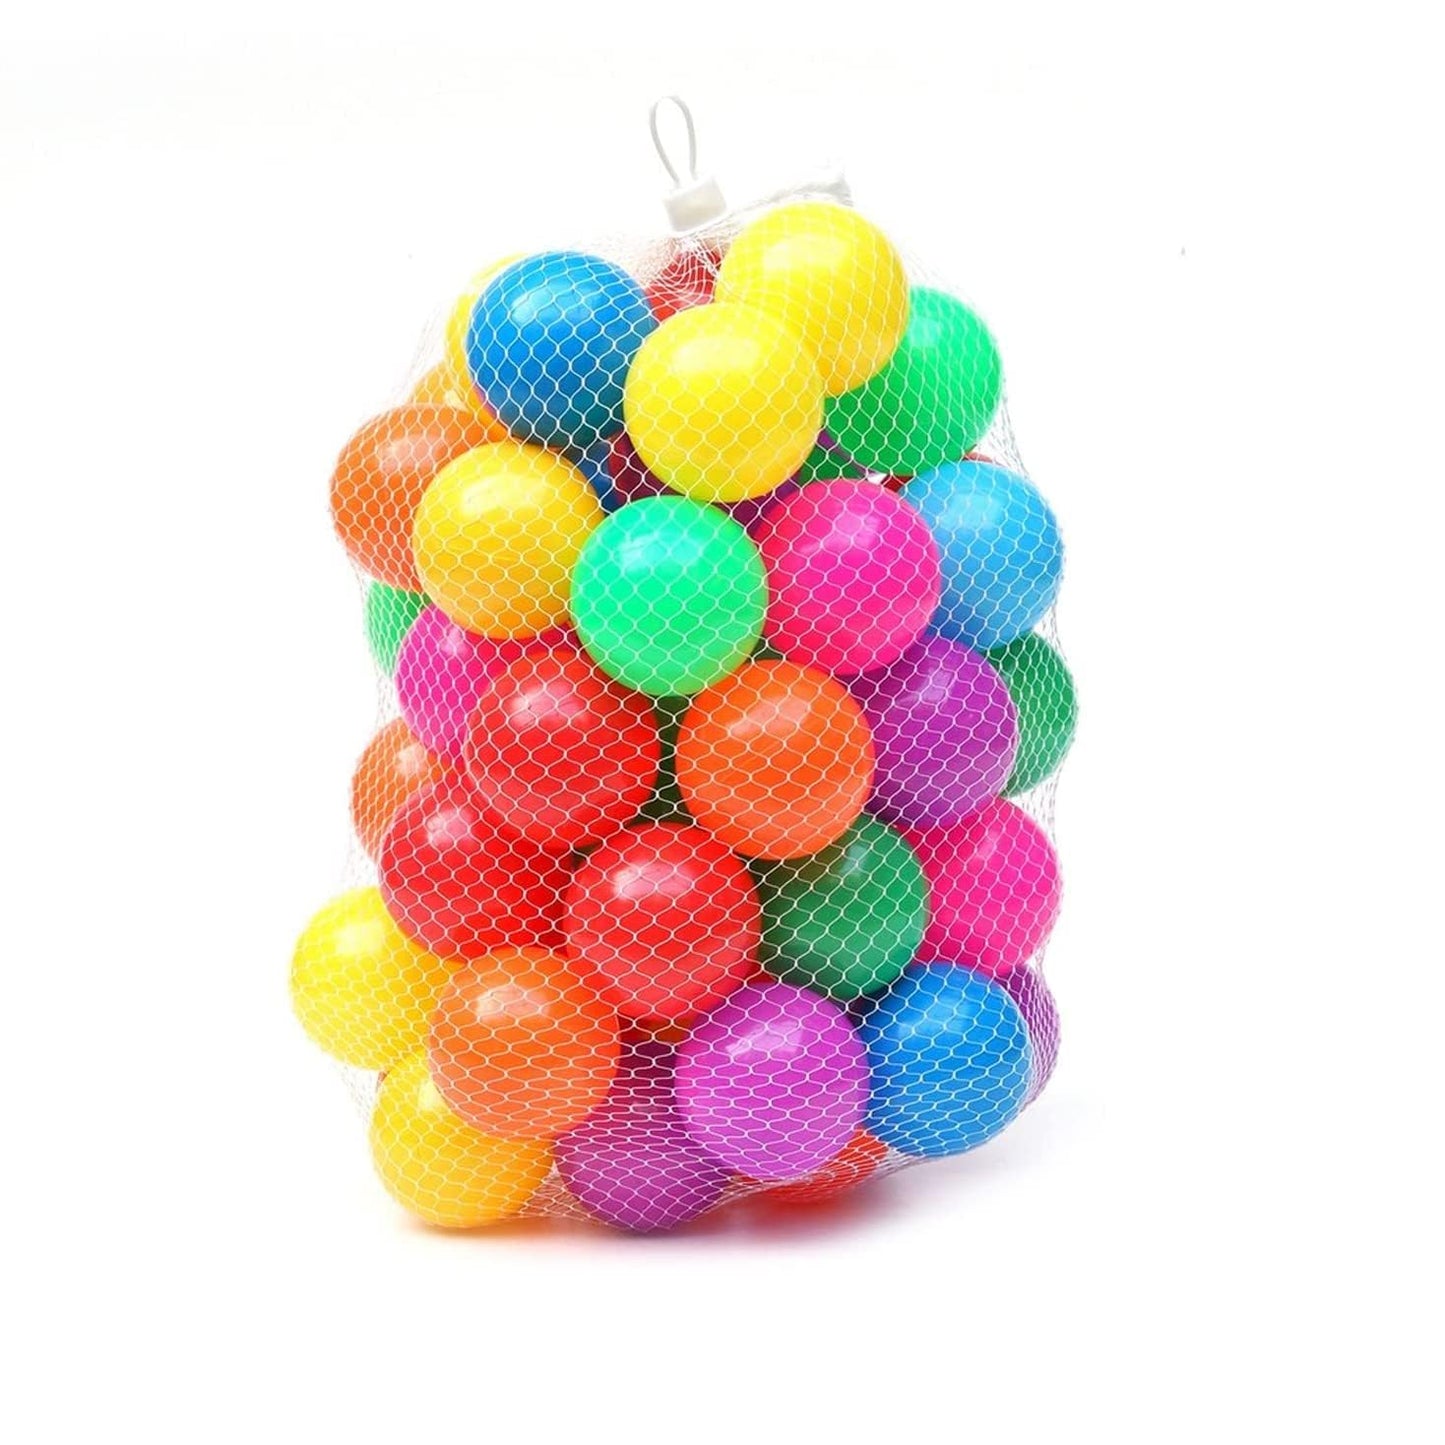 BAYBEE Soft Plastic Baby Pit Balls for Kids Reusable Soft Crush Proof Play Pit Balls Multicolour - (216 Pcs)